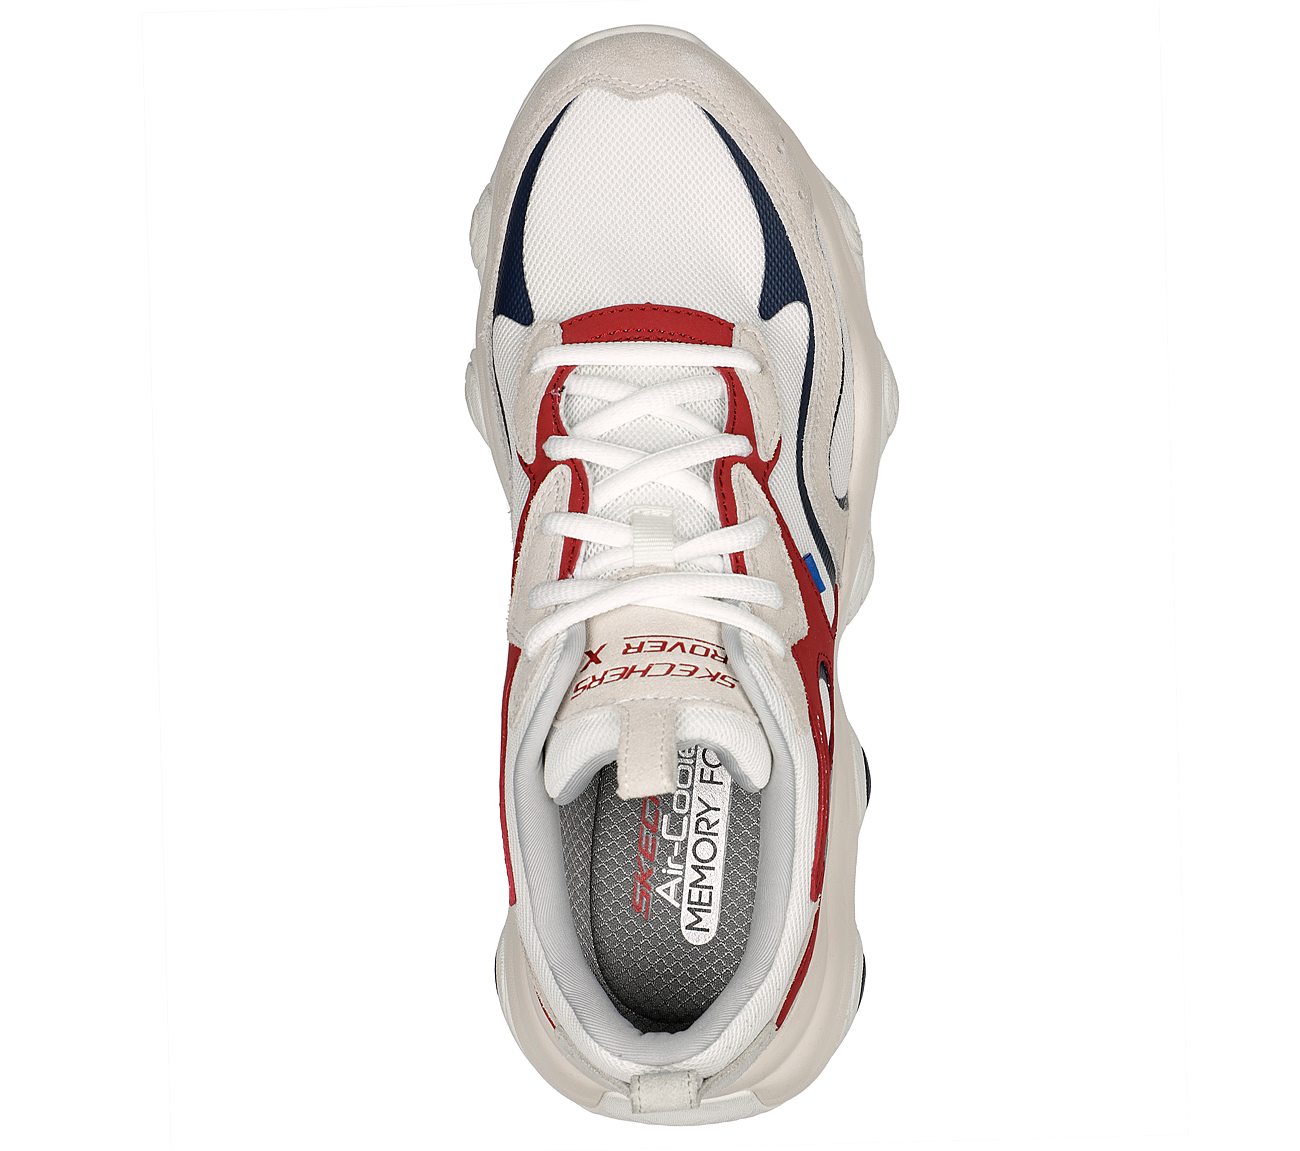 ROVER X-PROXIMITY, WHITE/NAVY/RED Footwear Top View